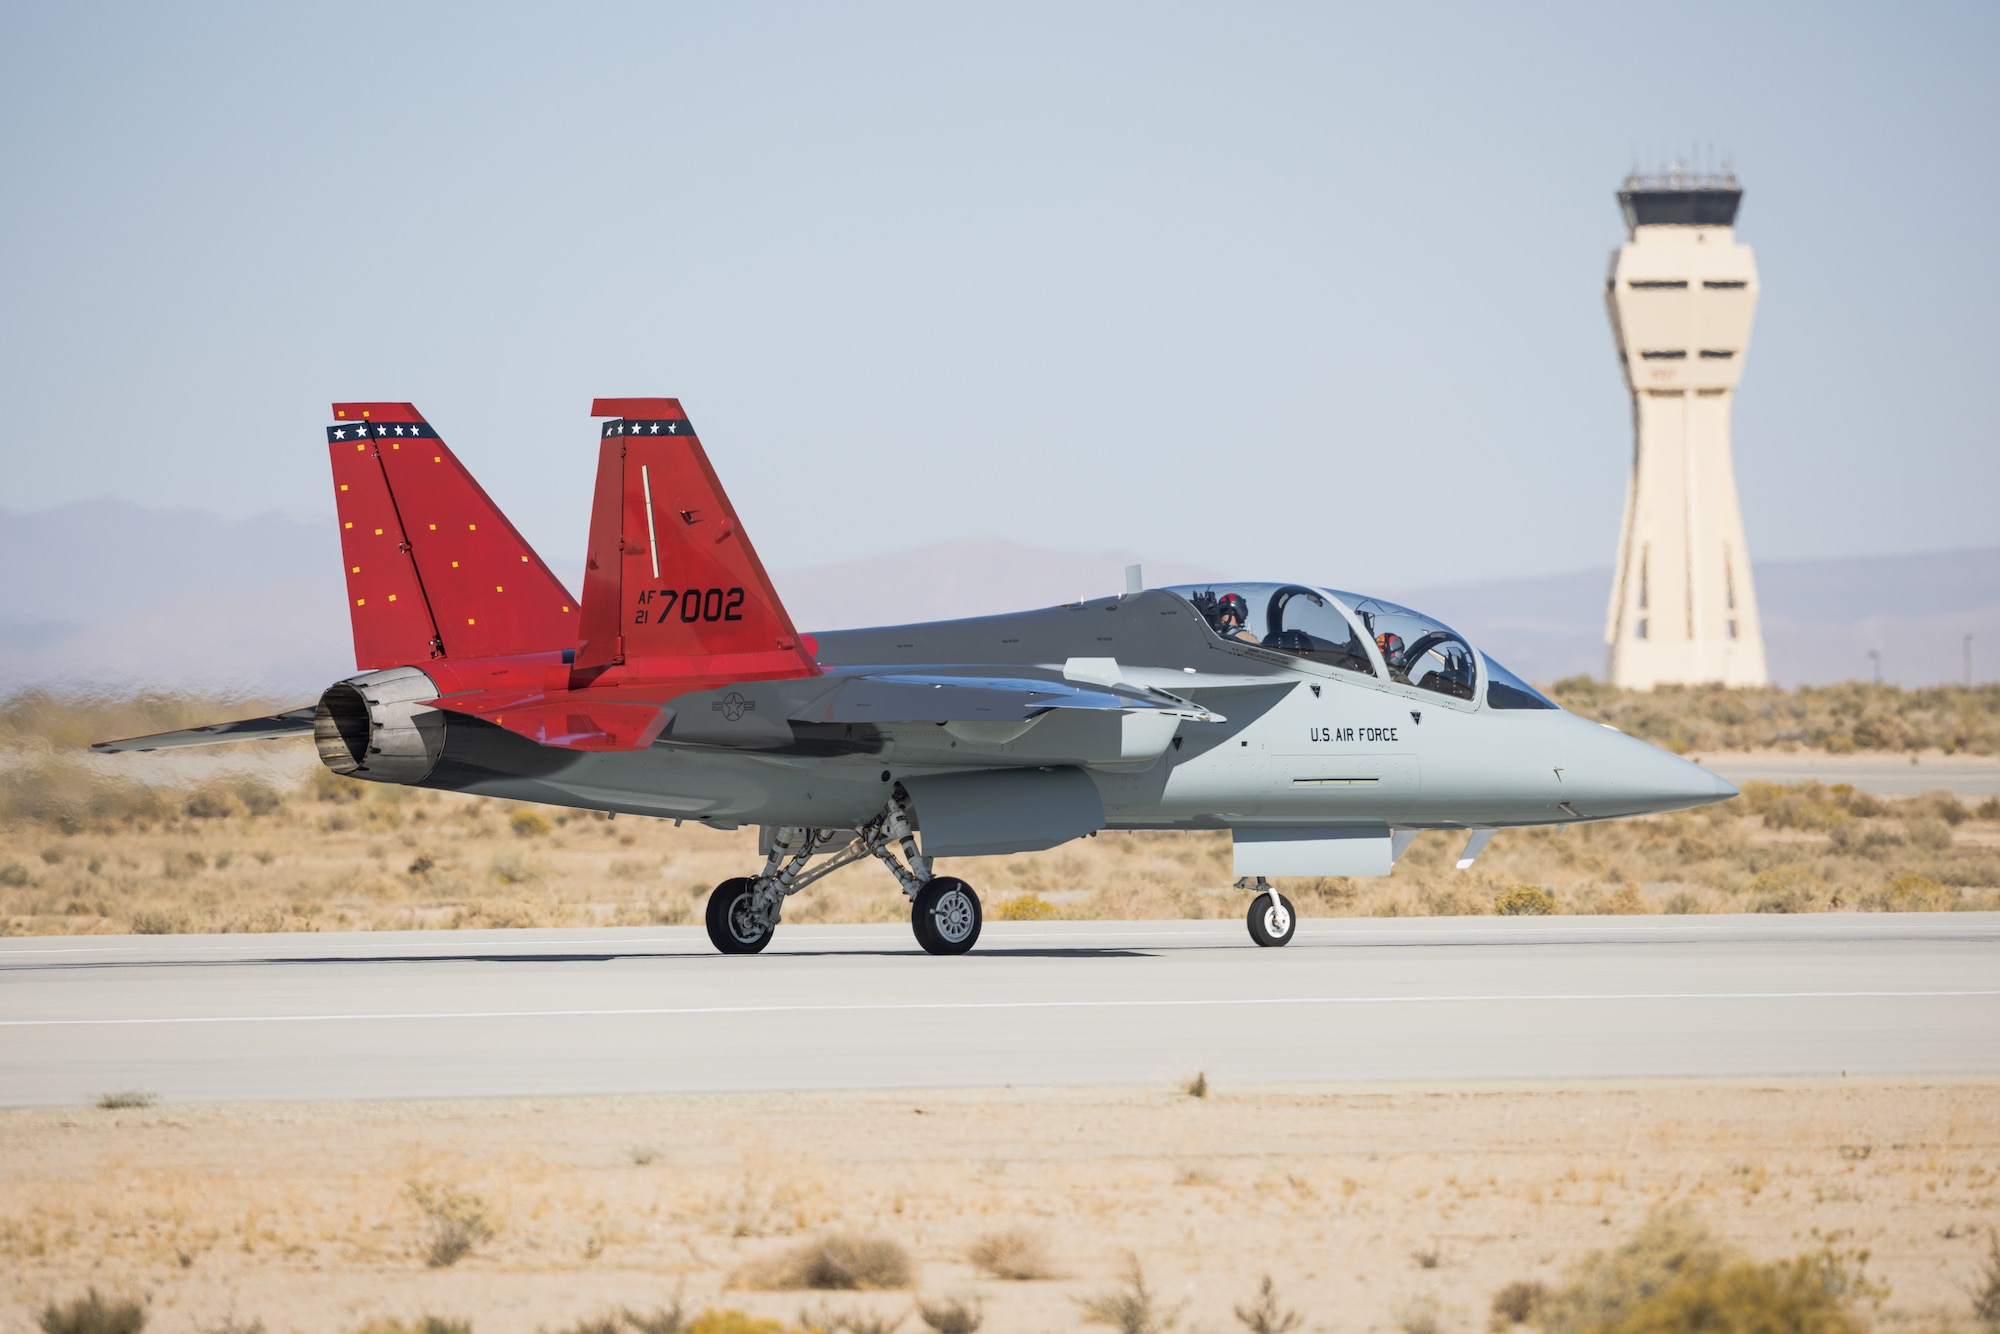 The first T-7A Red Hawk arrives at Edwards Air Force Base, California, Nov. 8. The aircraft’s test campaign is being executed by the T-7A Integrated Test Force, part of the Airpower Foundations Combined Test Force in association with the 416th Flight Test Squadron. The Integrated Test Force is a partnership between the USAF and T-7A manufacturer, The Boeing Company. (Air Force photo by Joshua McClanahan)